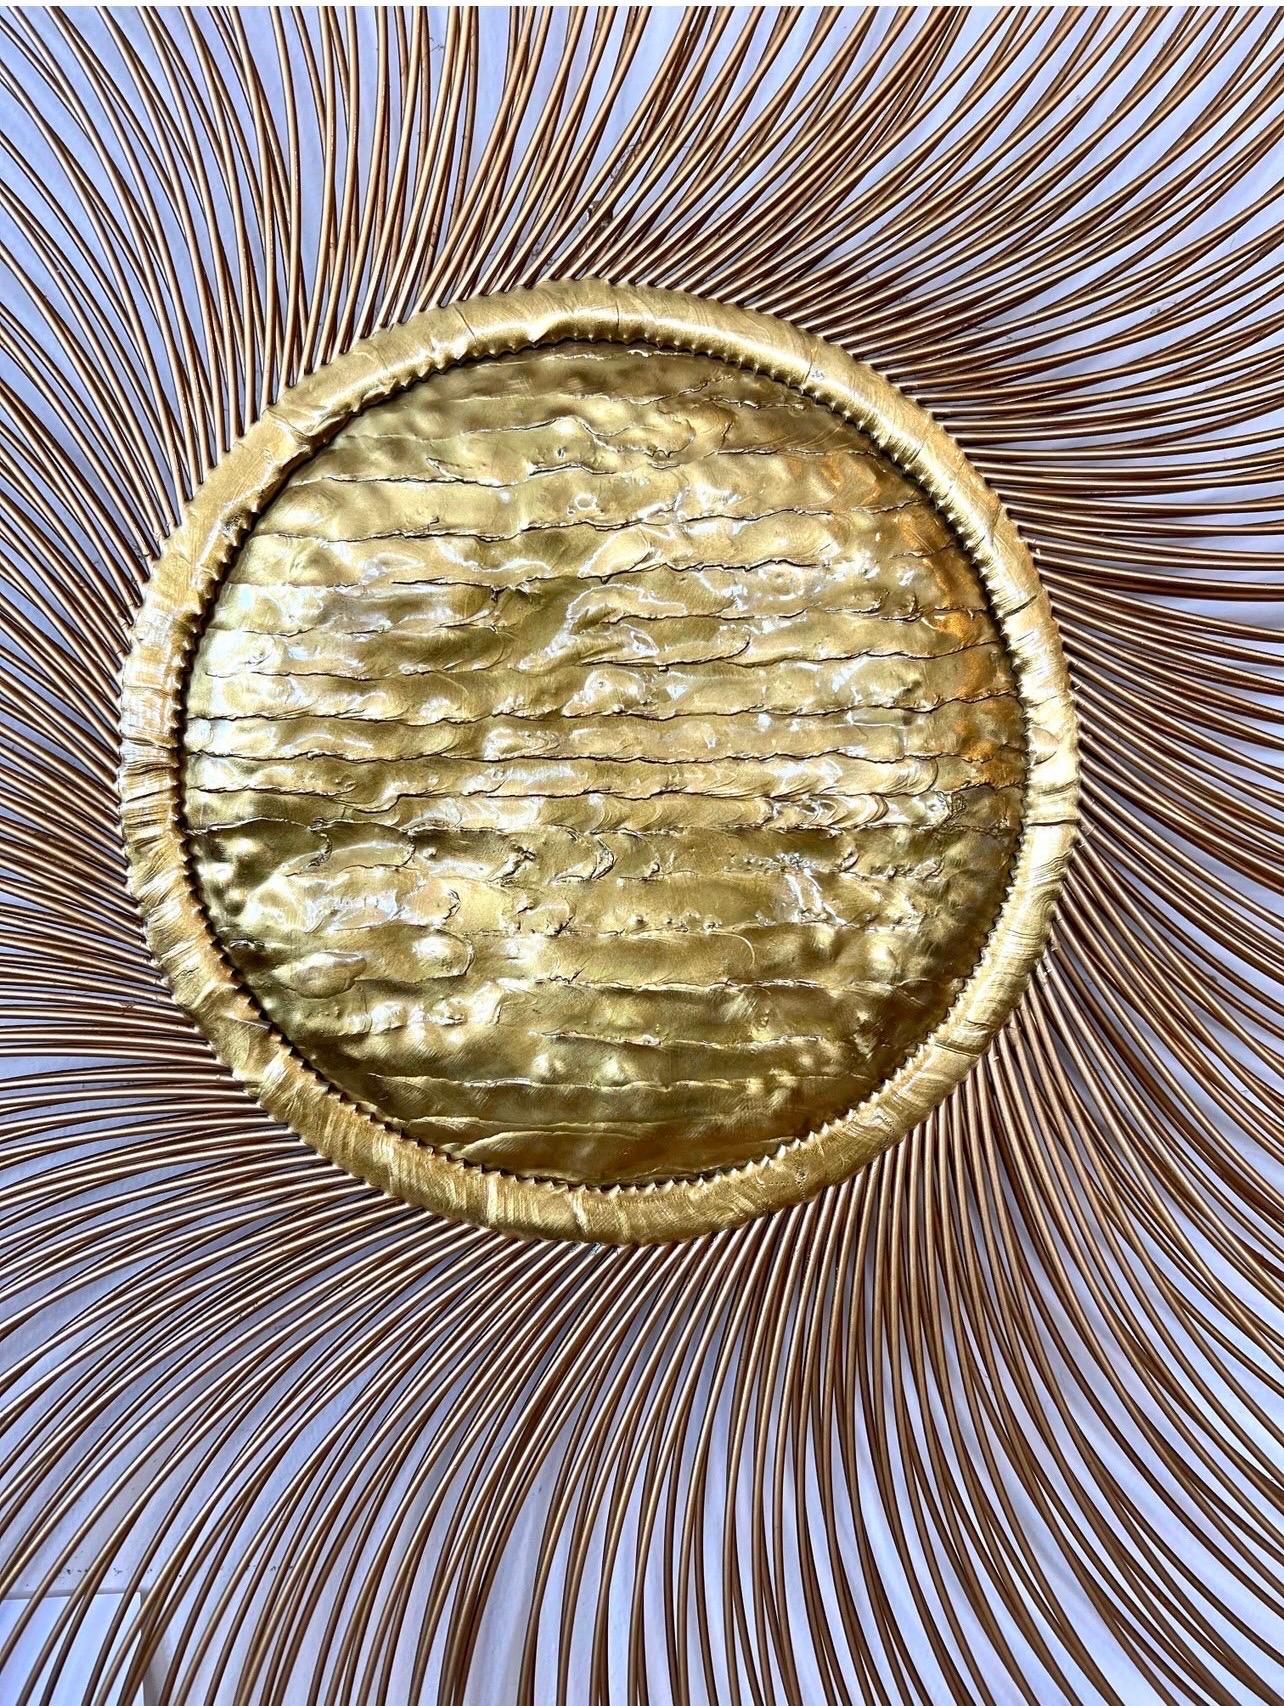 Coveted Casa Devall sunburst wall sculpture with a hammered brass center and two layers of painted rods creating a spiral sunburst effect which is a feast for the eyes! Note spokes have black tips which really makes this sculpture a work of art and